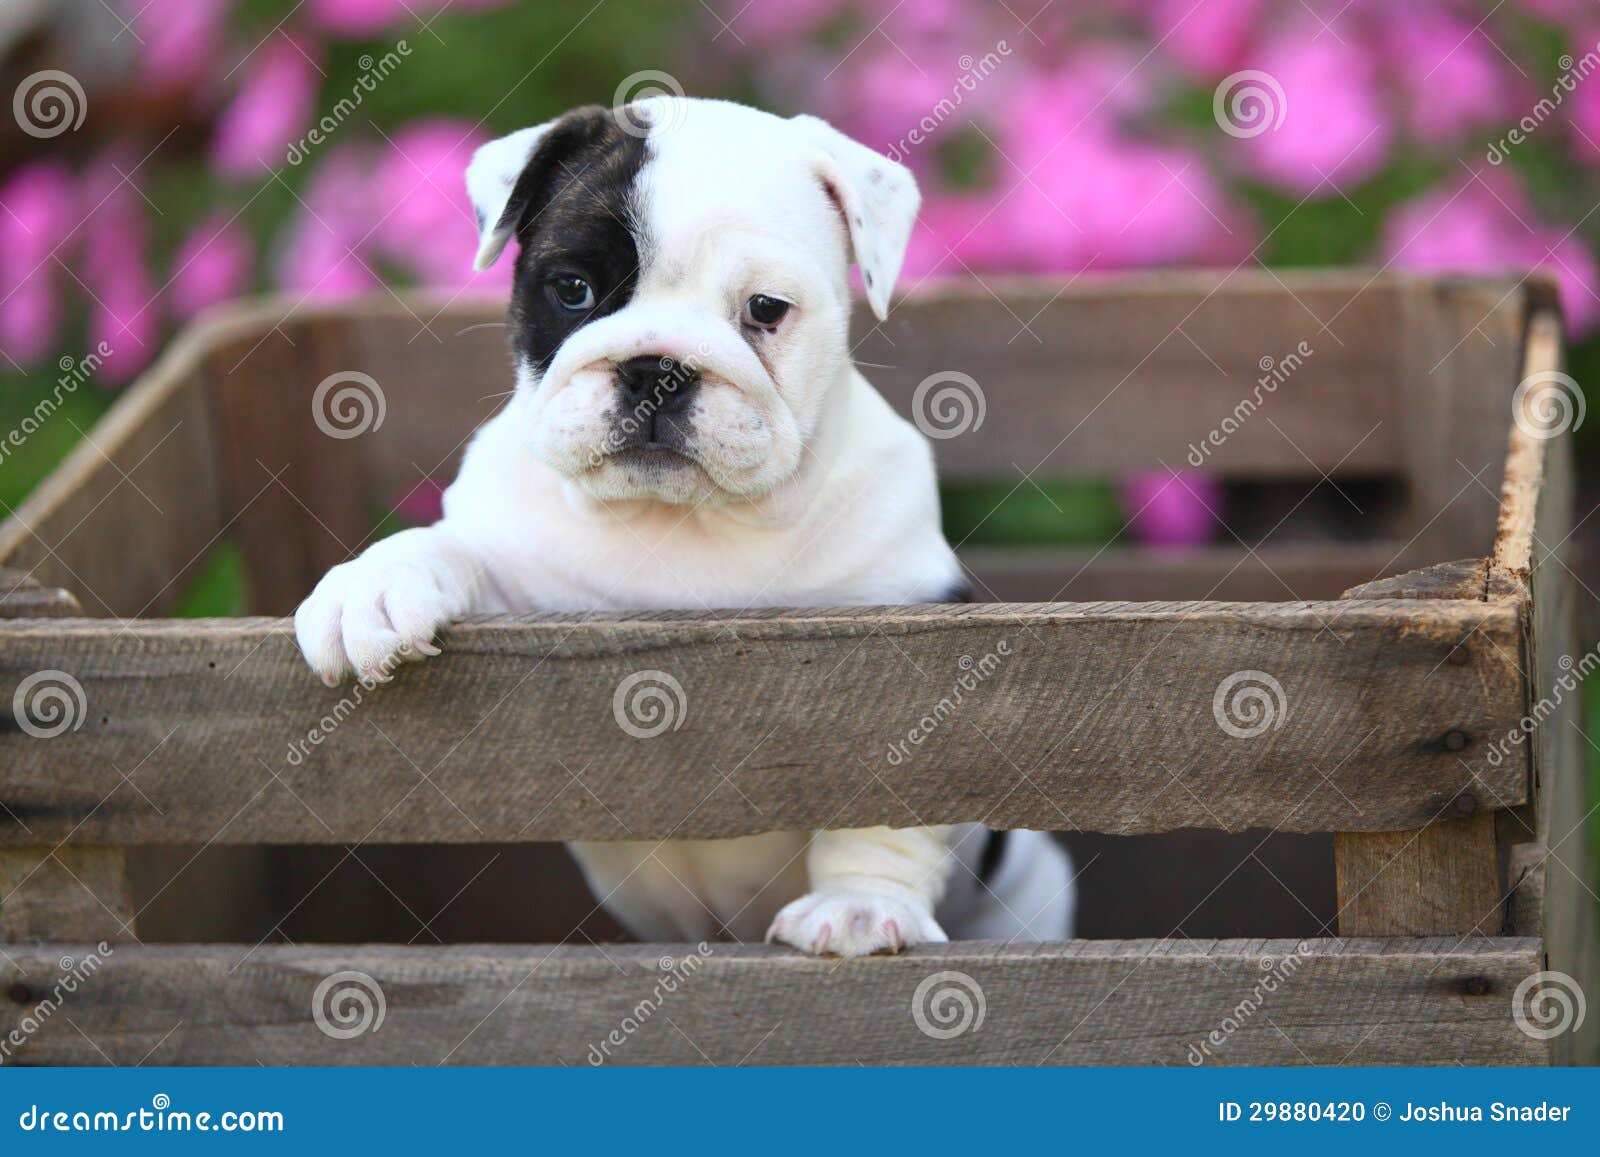 English Bulldog Puppy In Wooden Crate Stock Photo Image